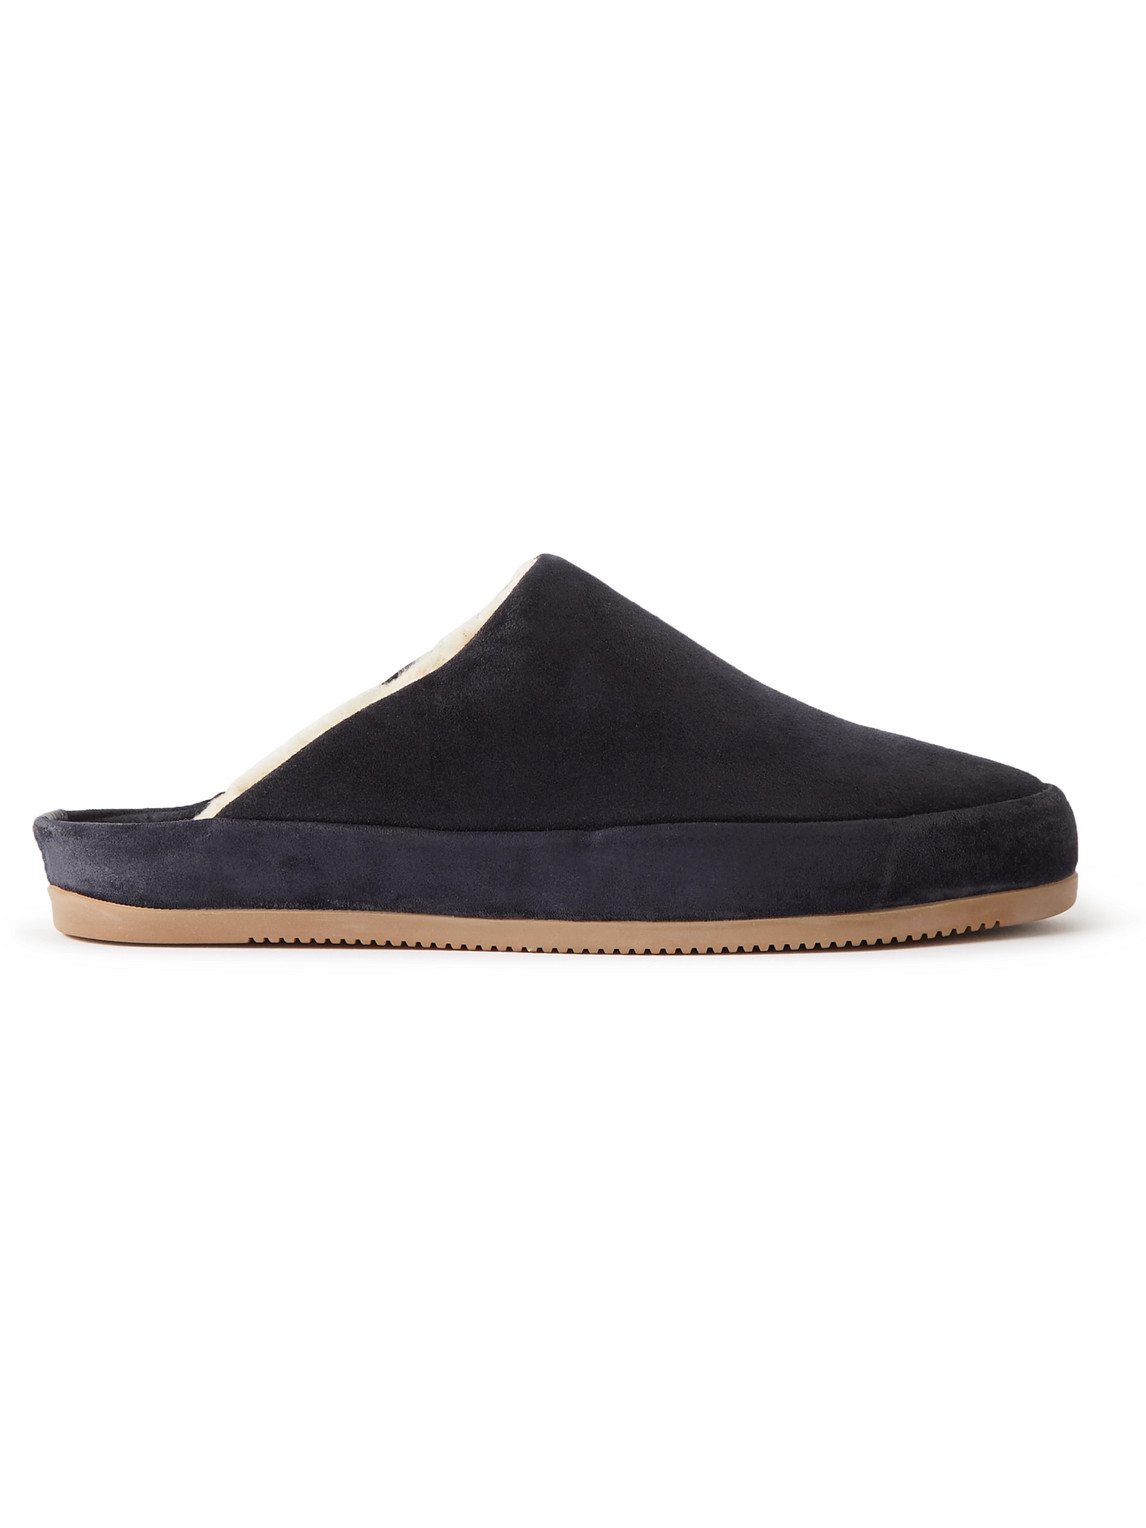 Mulo - Shearling-Lined Suede Slippers - Men - Blue - UK 8 von Mulo